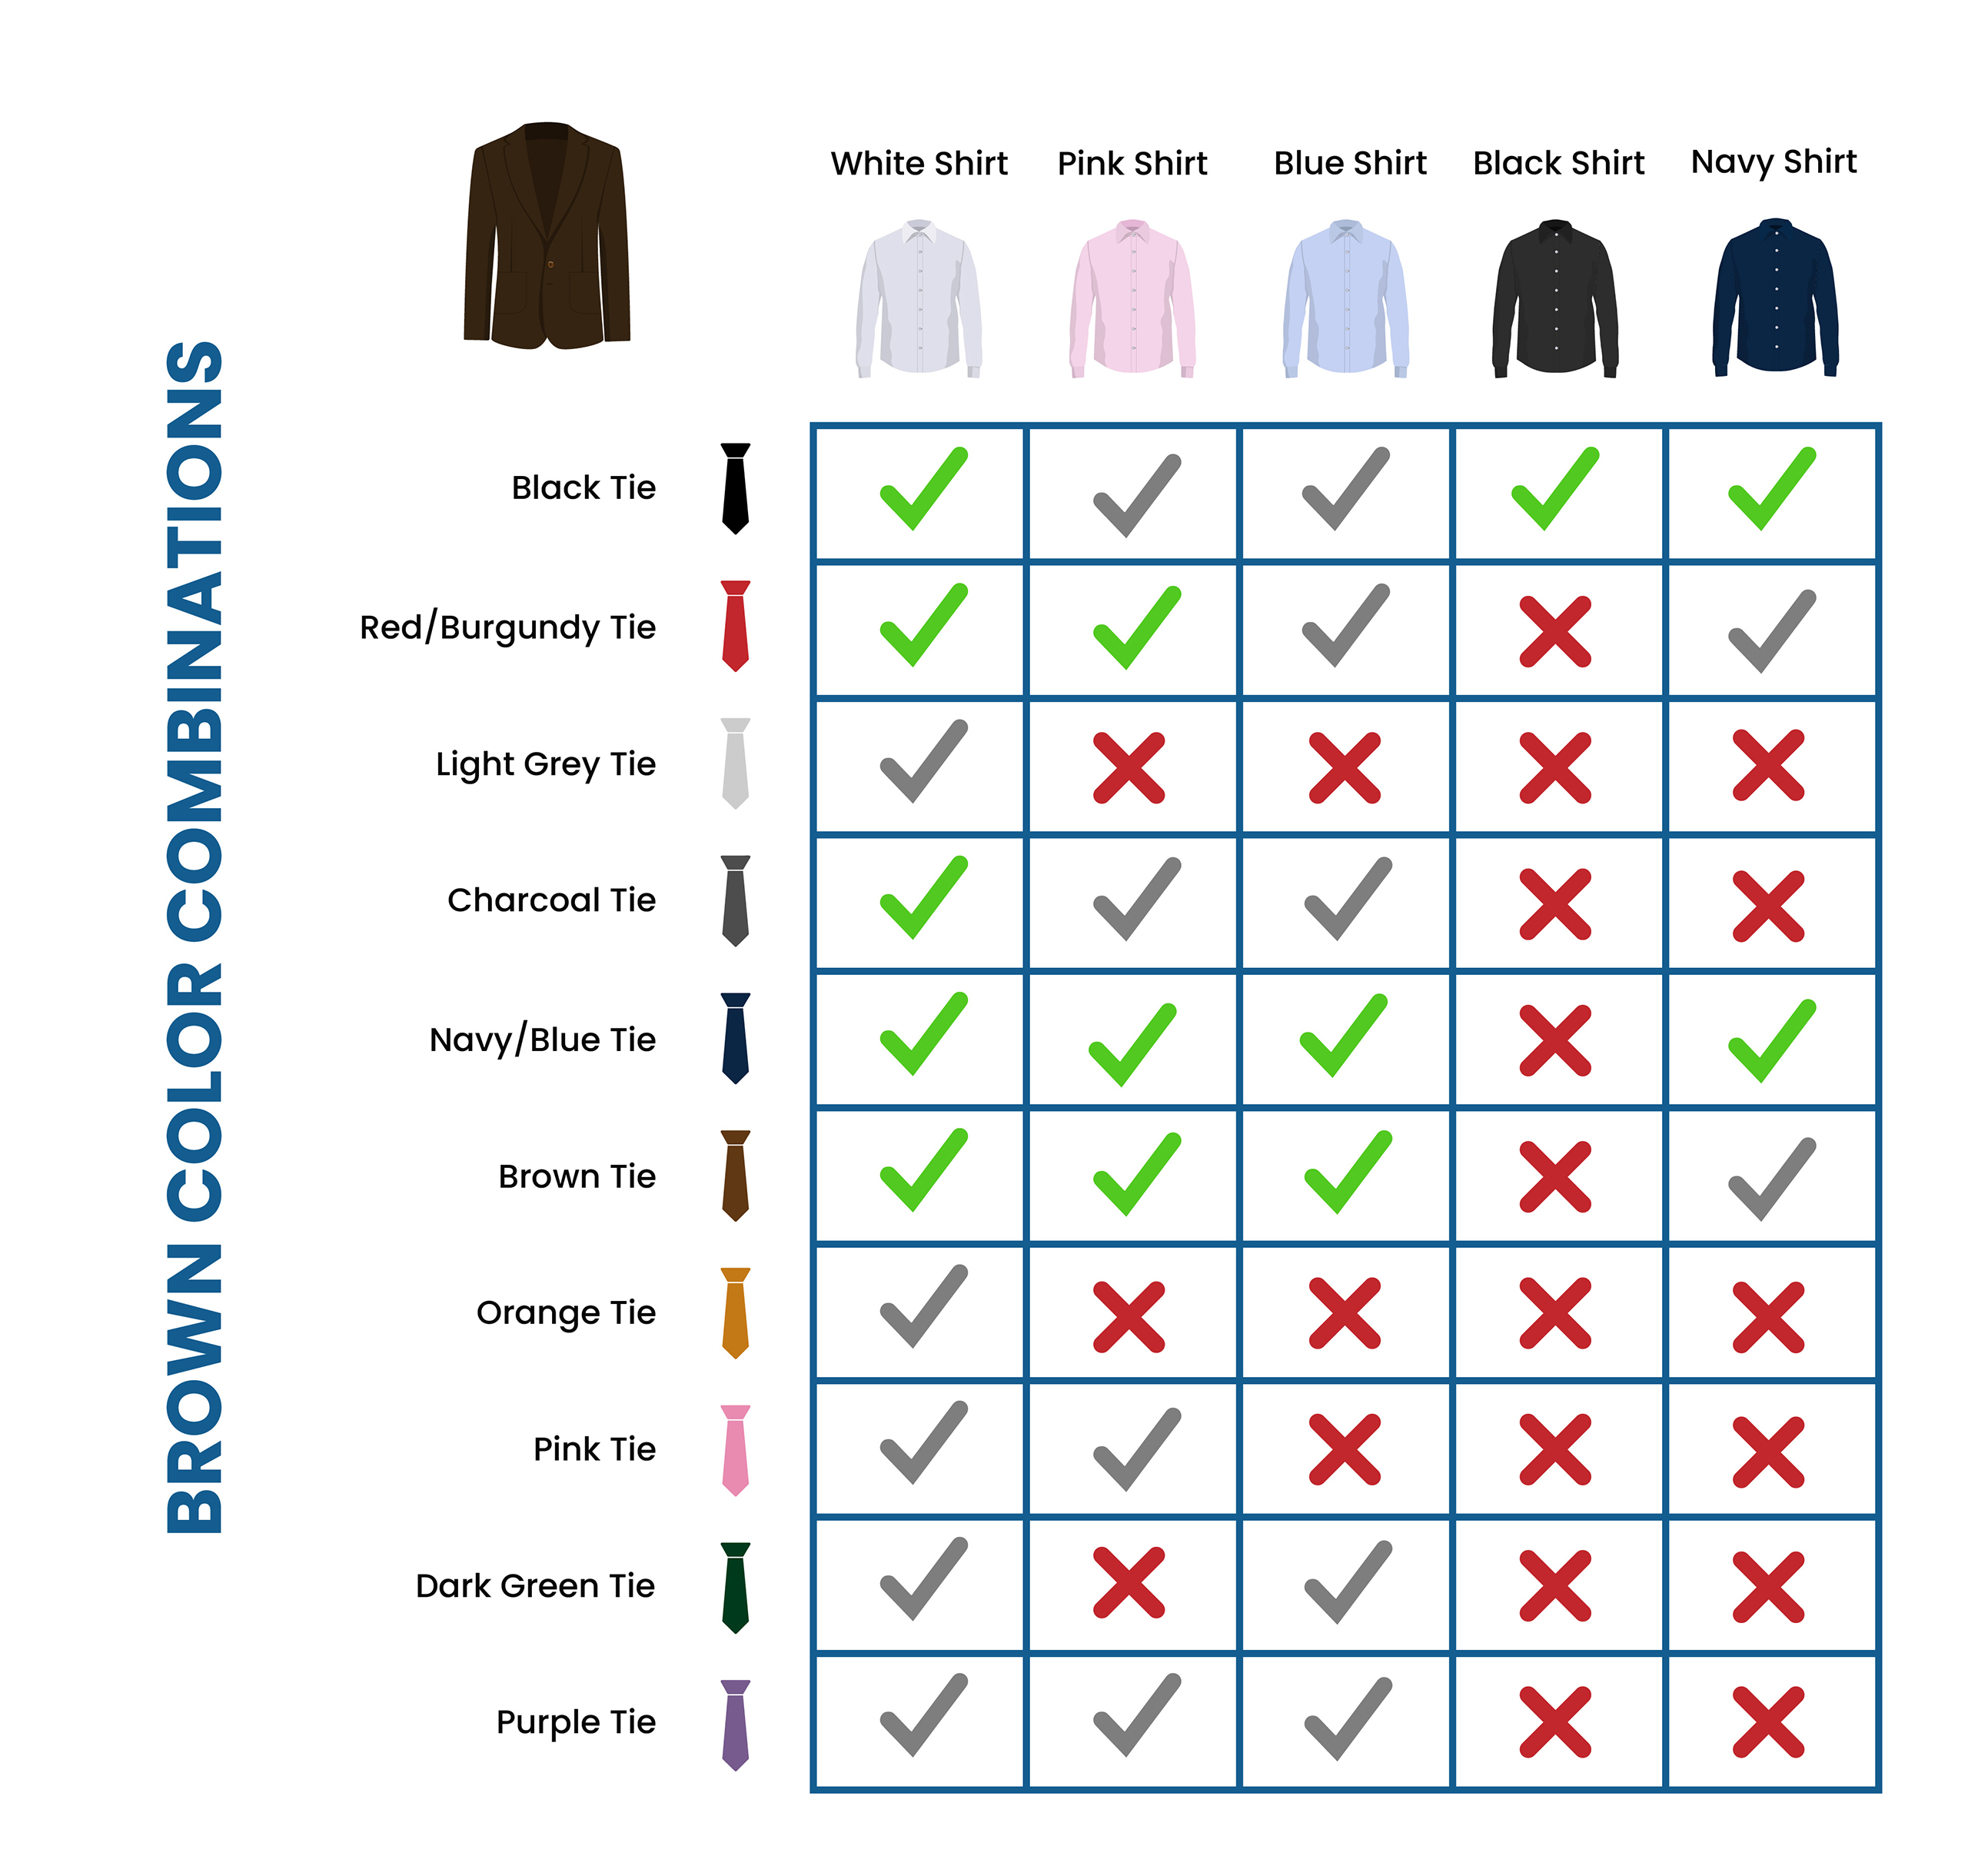 Suit and shirt colour combinations